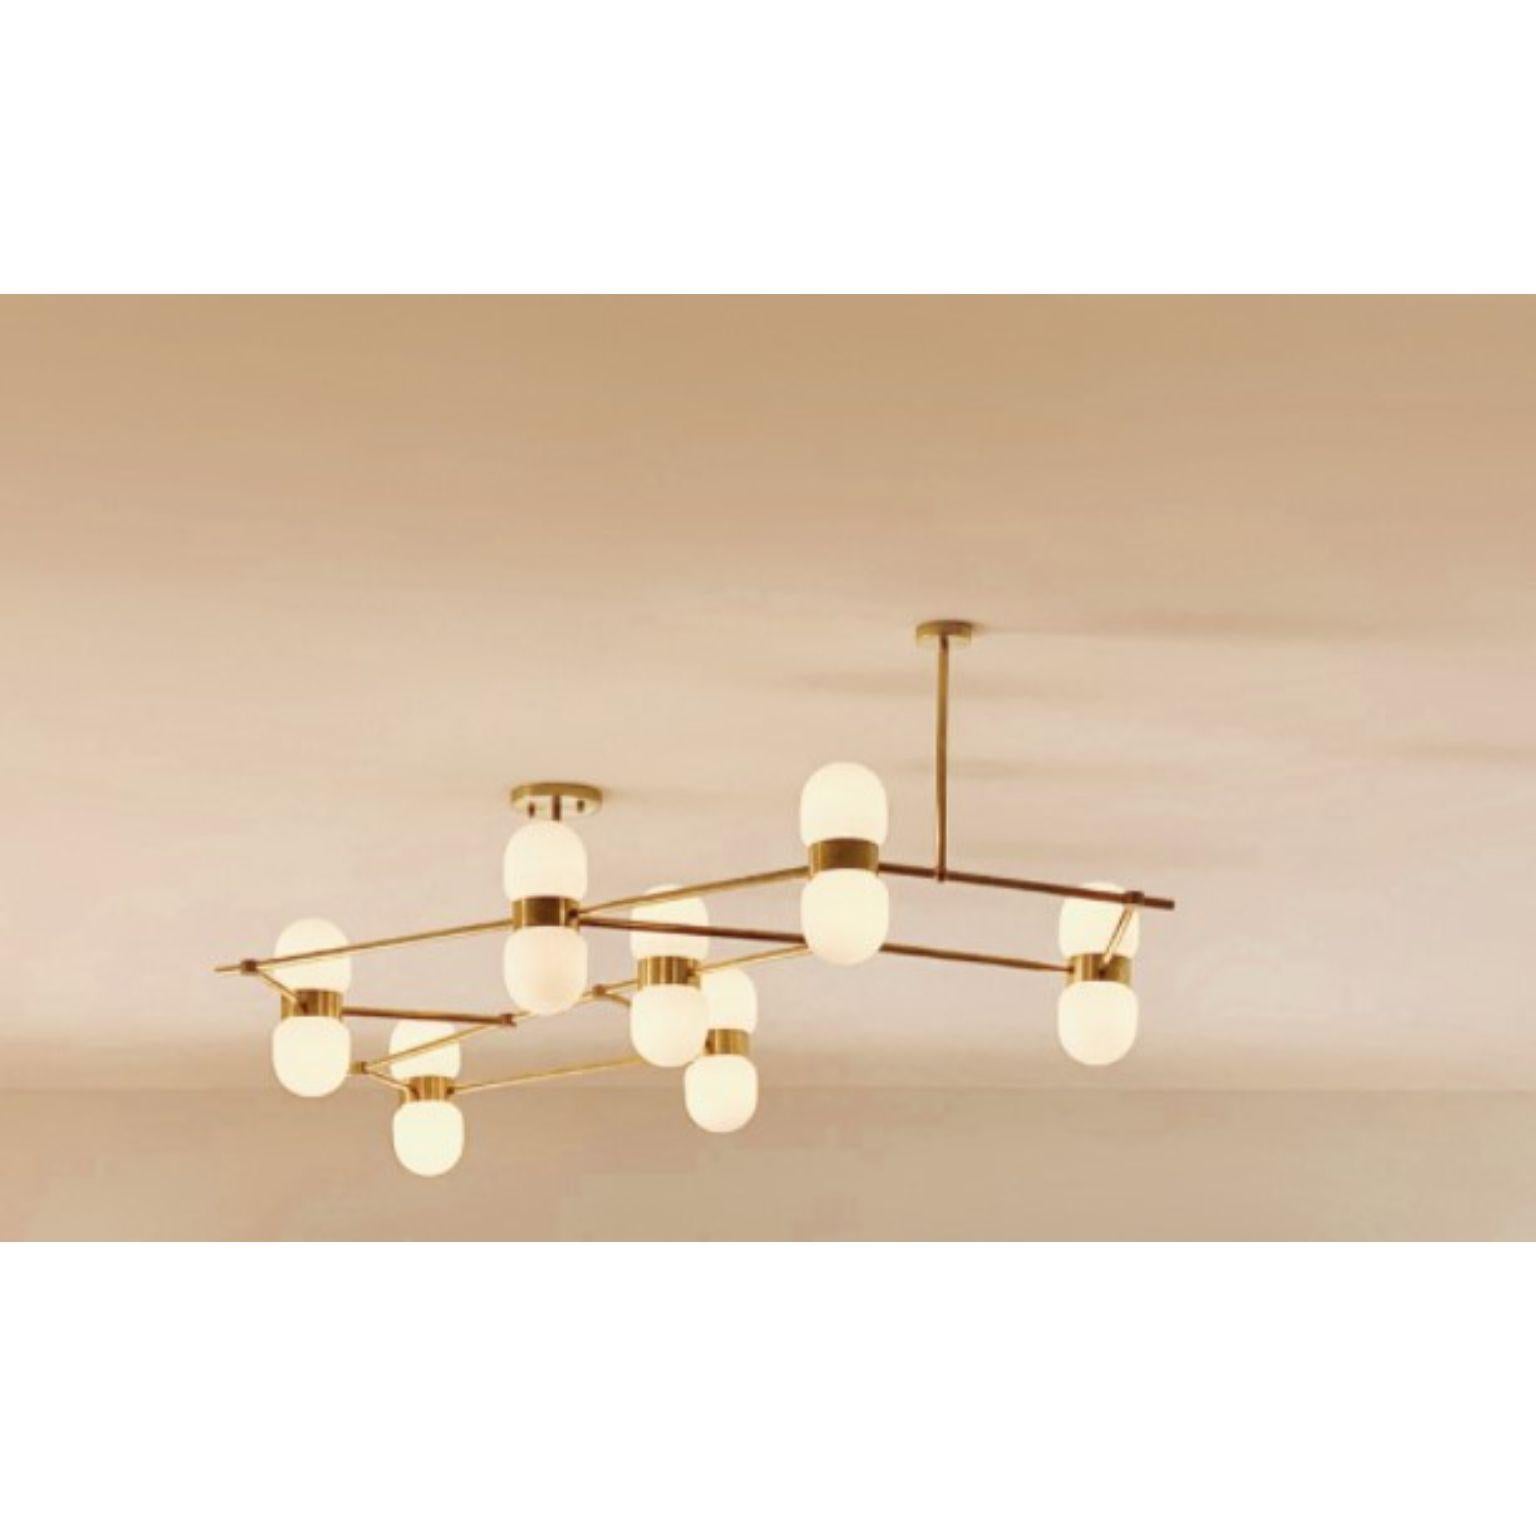 Nuvol chandelier 7 lamps by Contain
Dimensions: D150 x W20 x H140 cm
Materials: Brass structure and matte or glossy glass.
Available in different finishes and dimensions.

All our lamps can be wired according to each country. If sold to the USA it